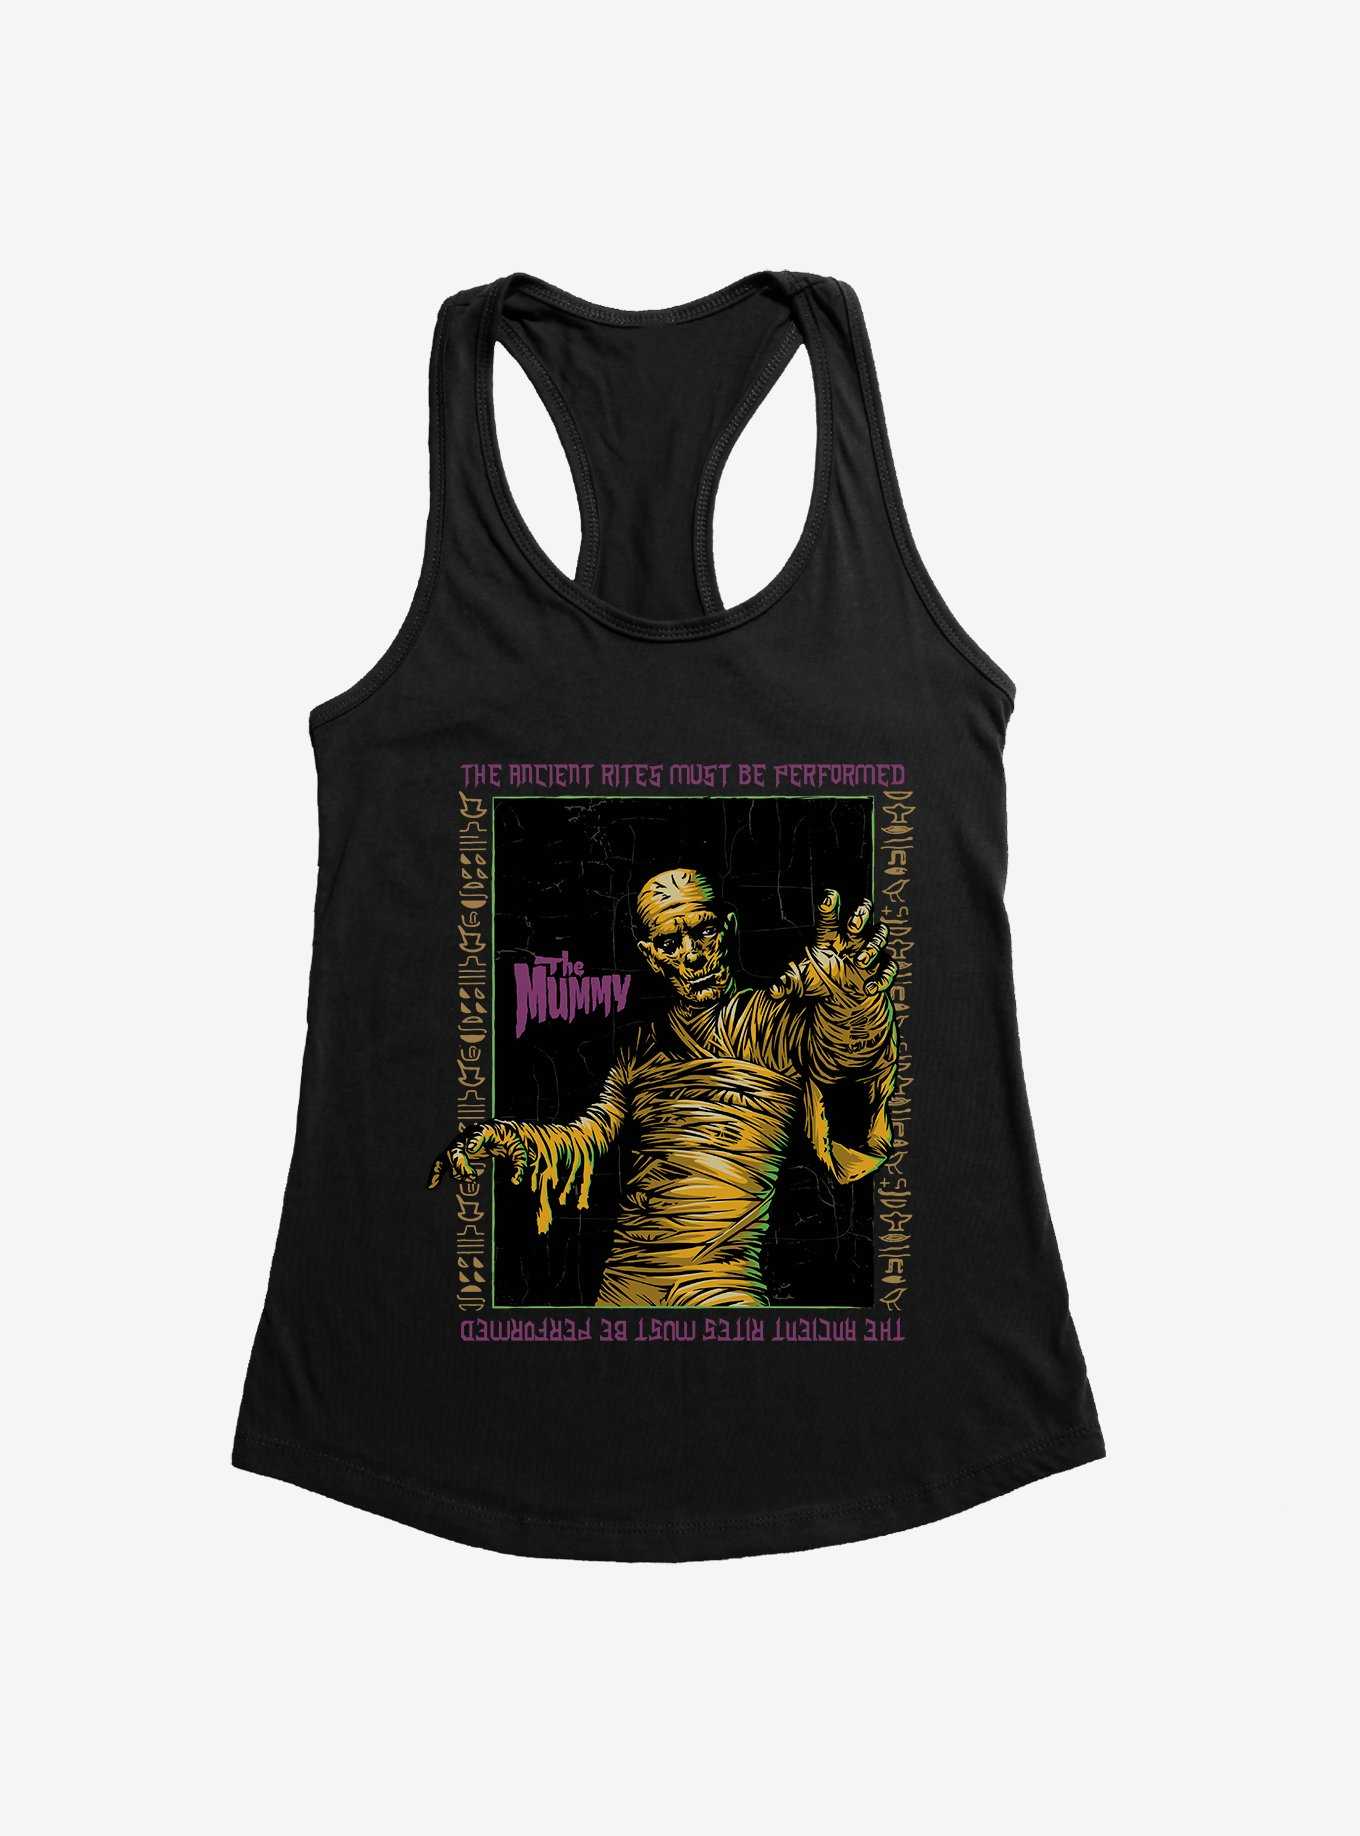 Universal Monsters The Mummy Ancient Rites Must Be Performed Girls Tank, , hi-res